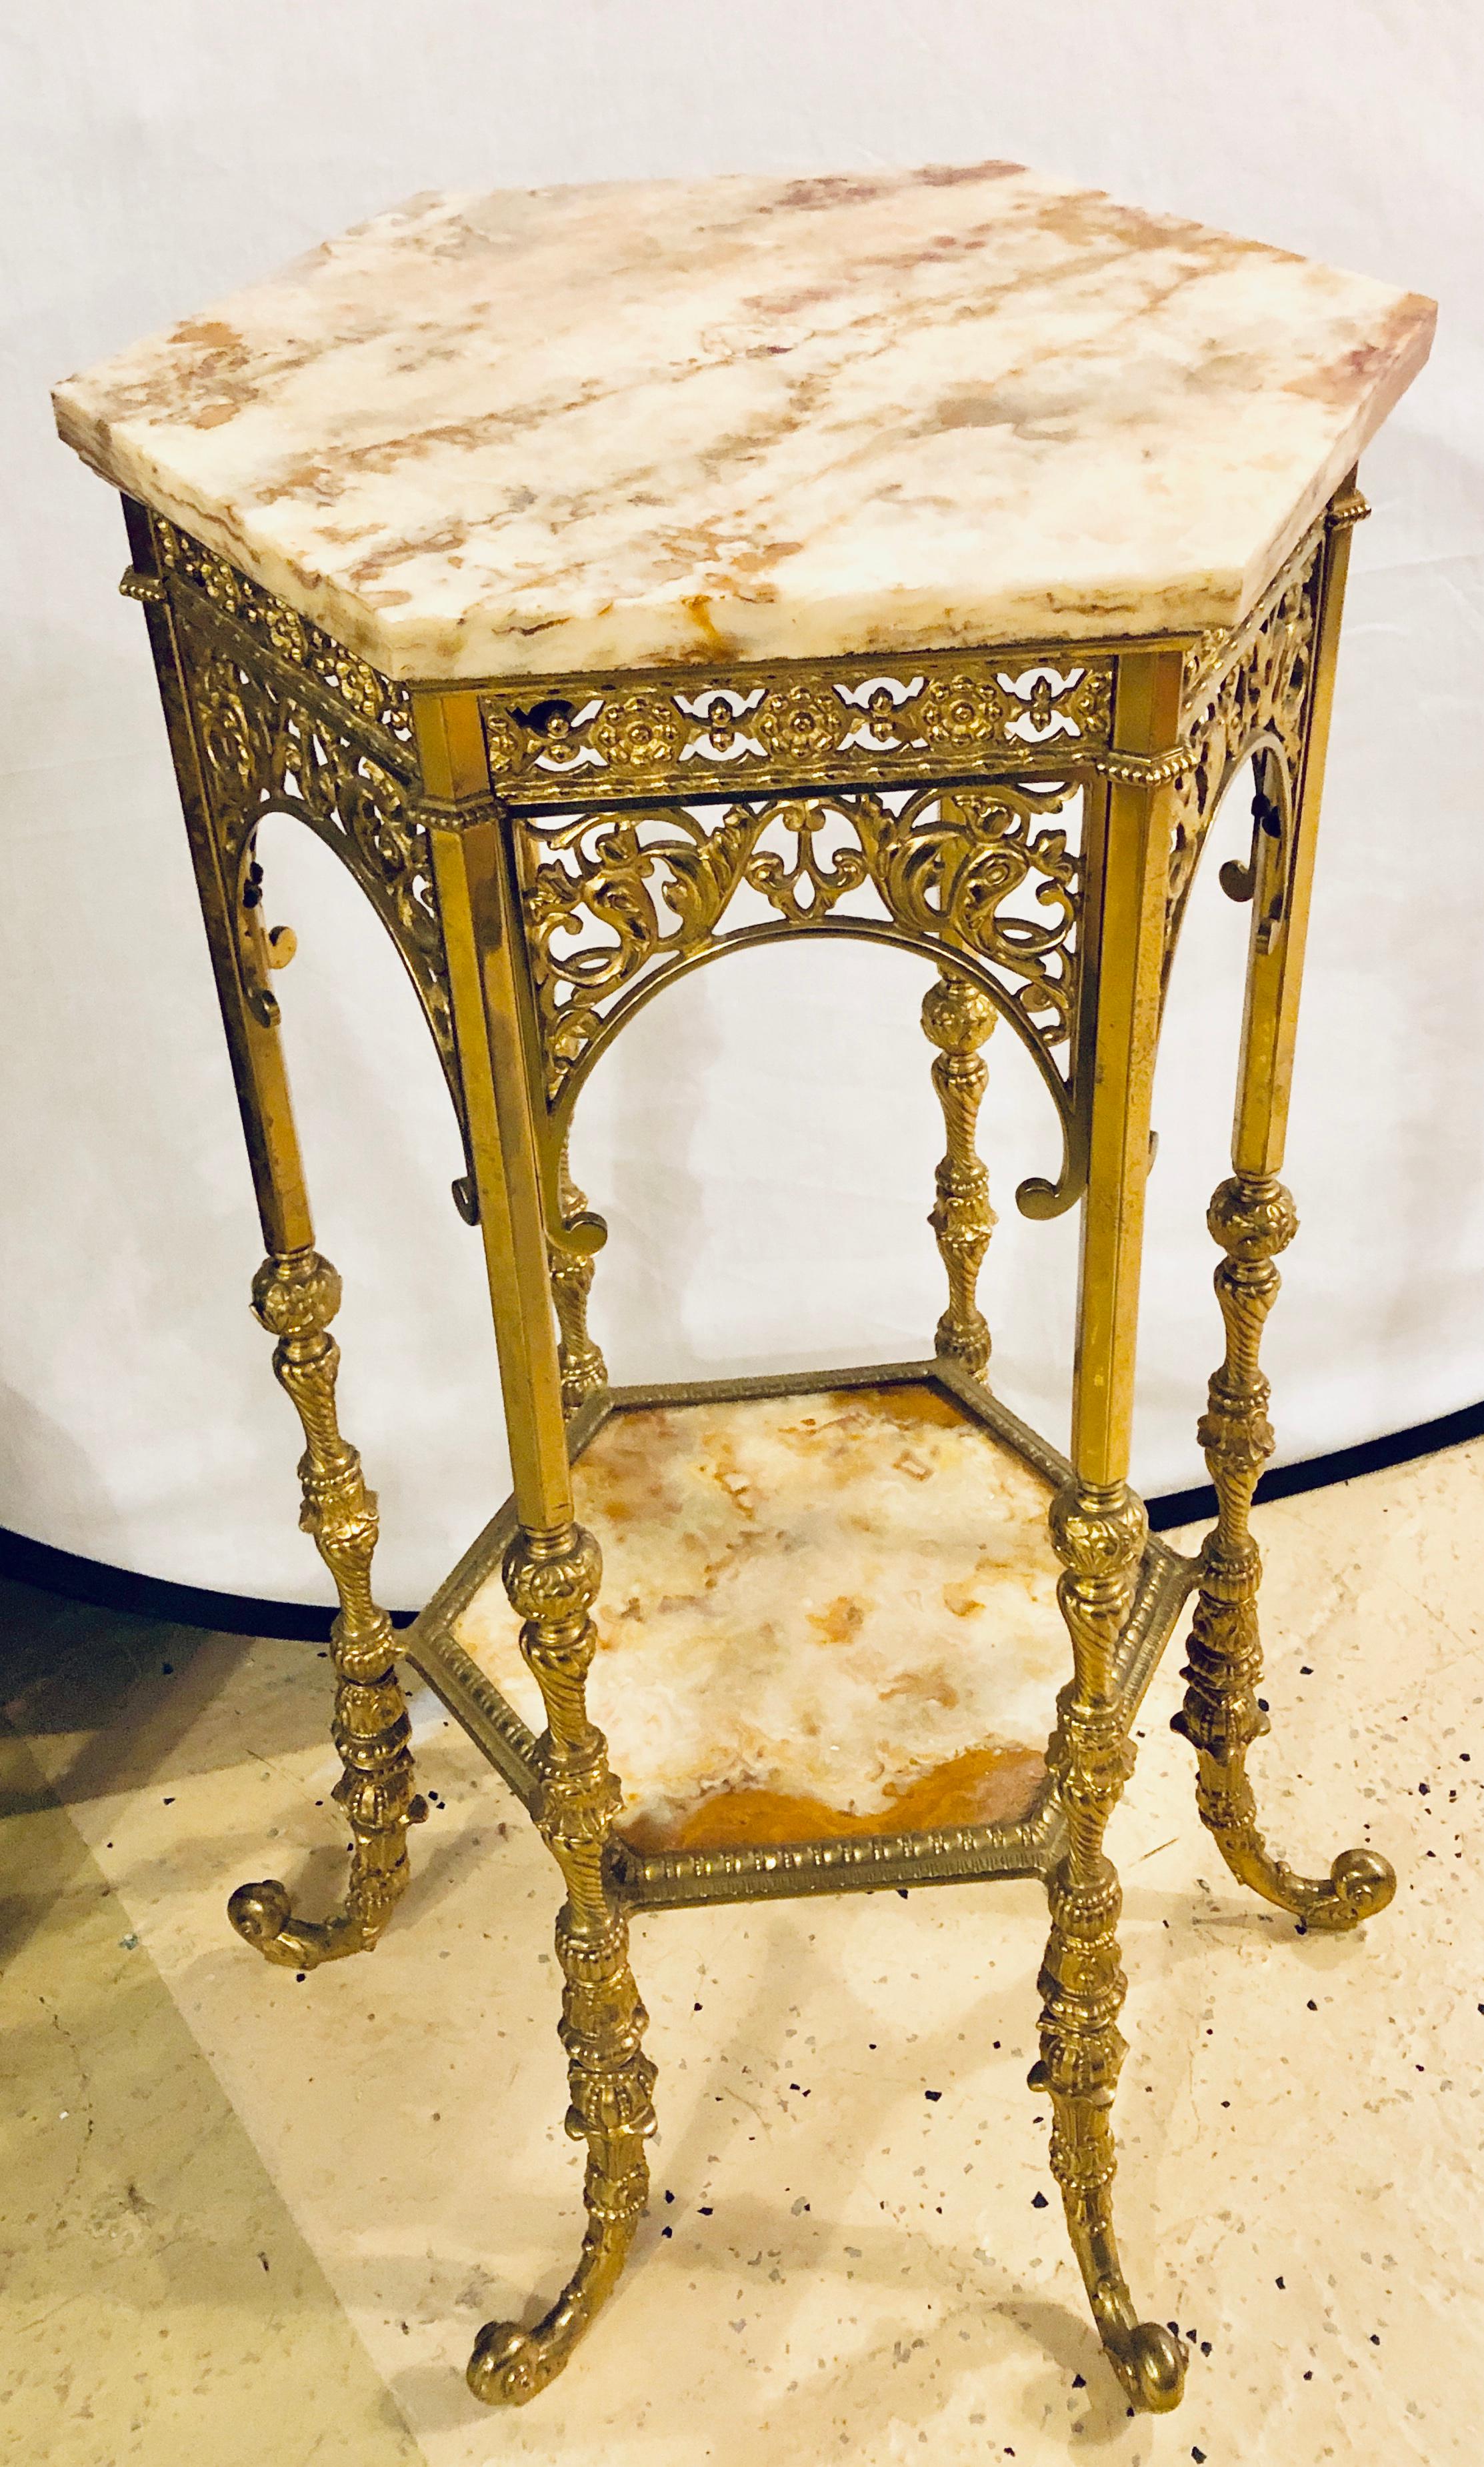 A bronze marble-top two-tier pedestal or end table. The finely carved and detailed frame having two antiques marble tiers. The whole having a hexagonal (six sided) shape with carved roses and scroll design.